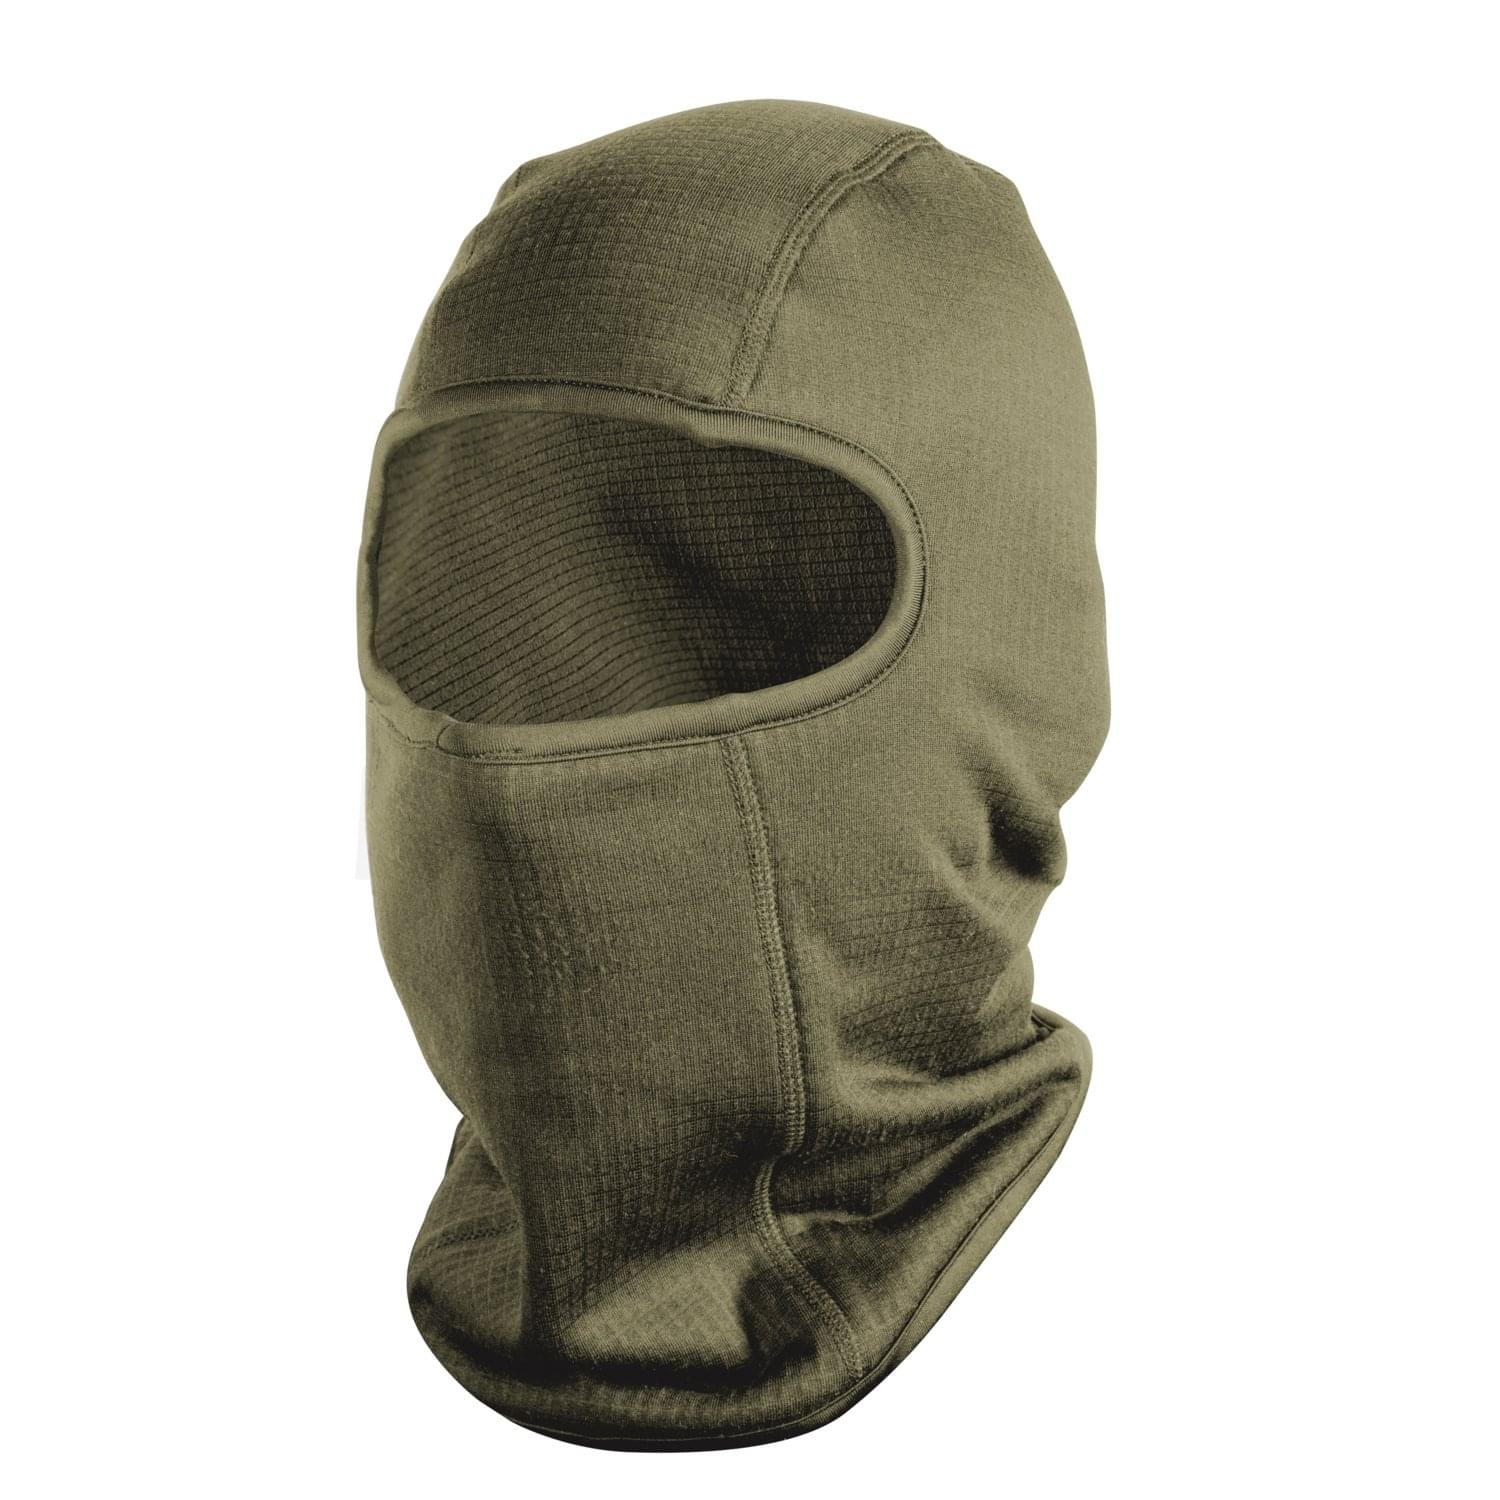 EXTREME COLD WEATHER BALACLAVA – COMFORTDRY® – Olive Green